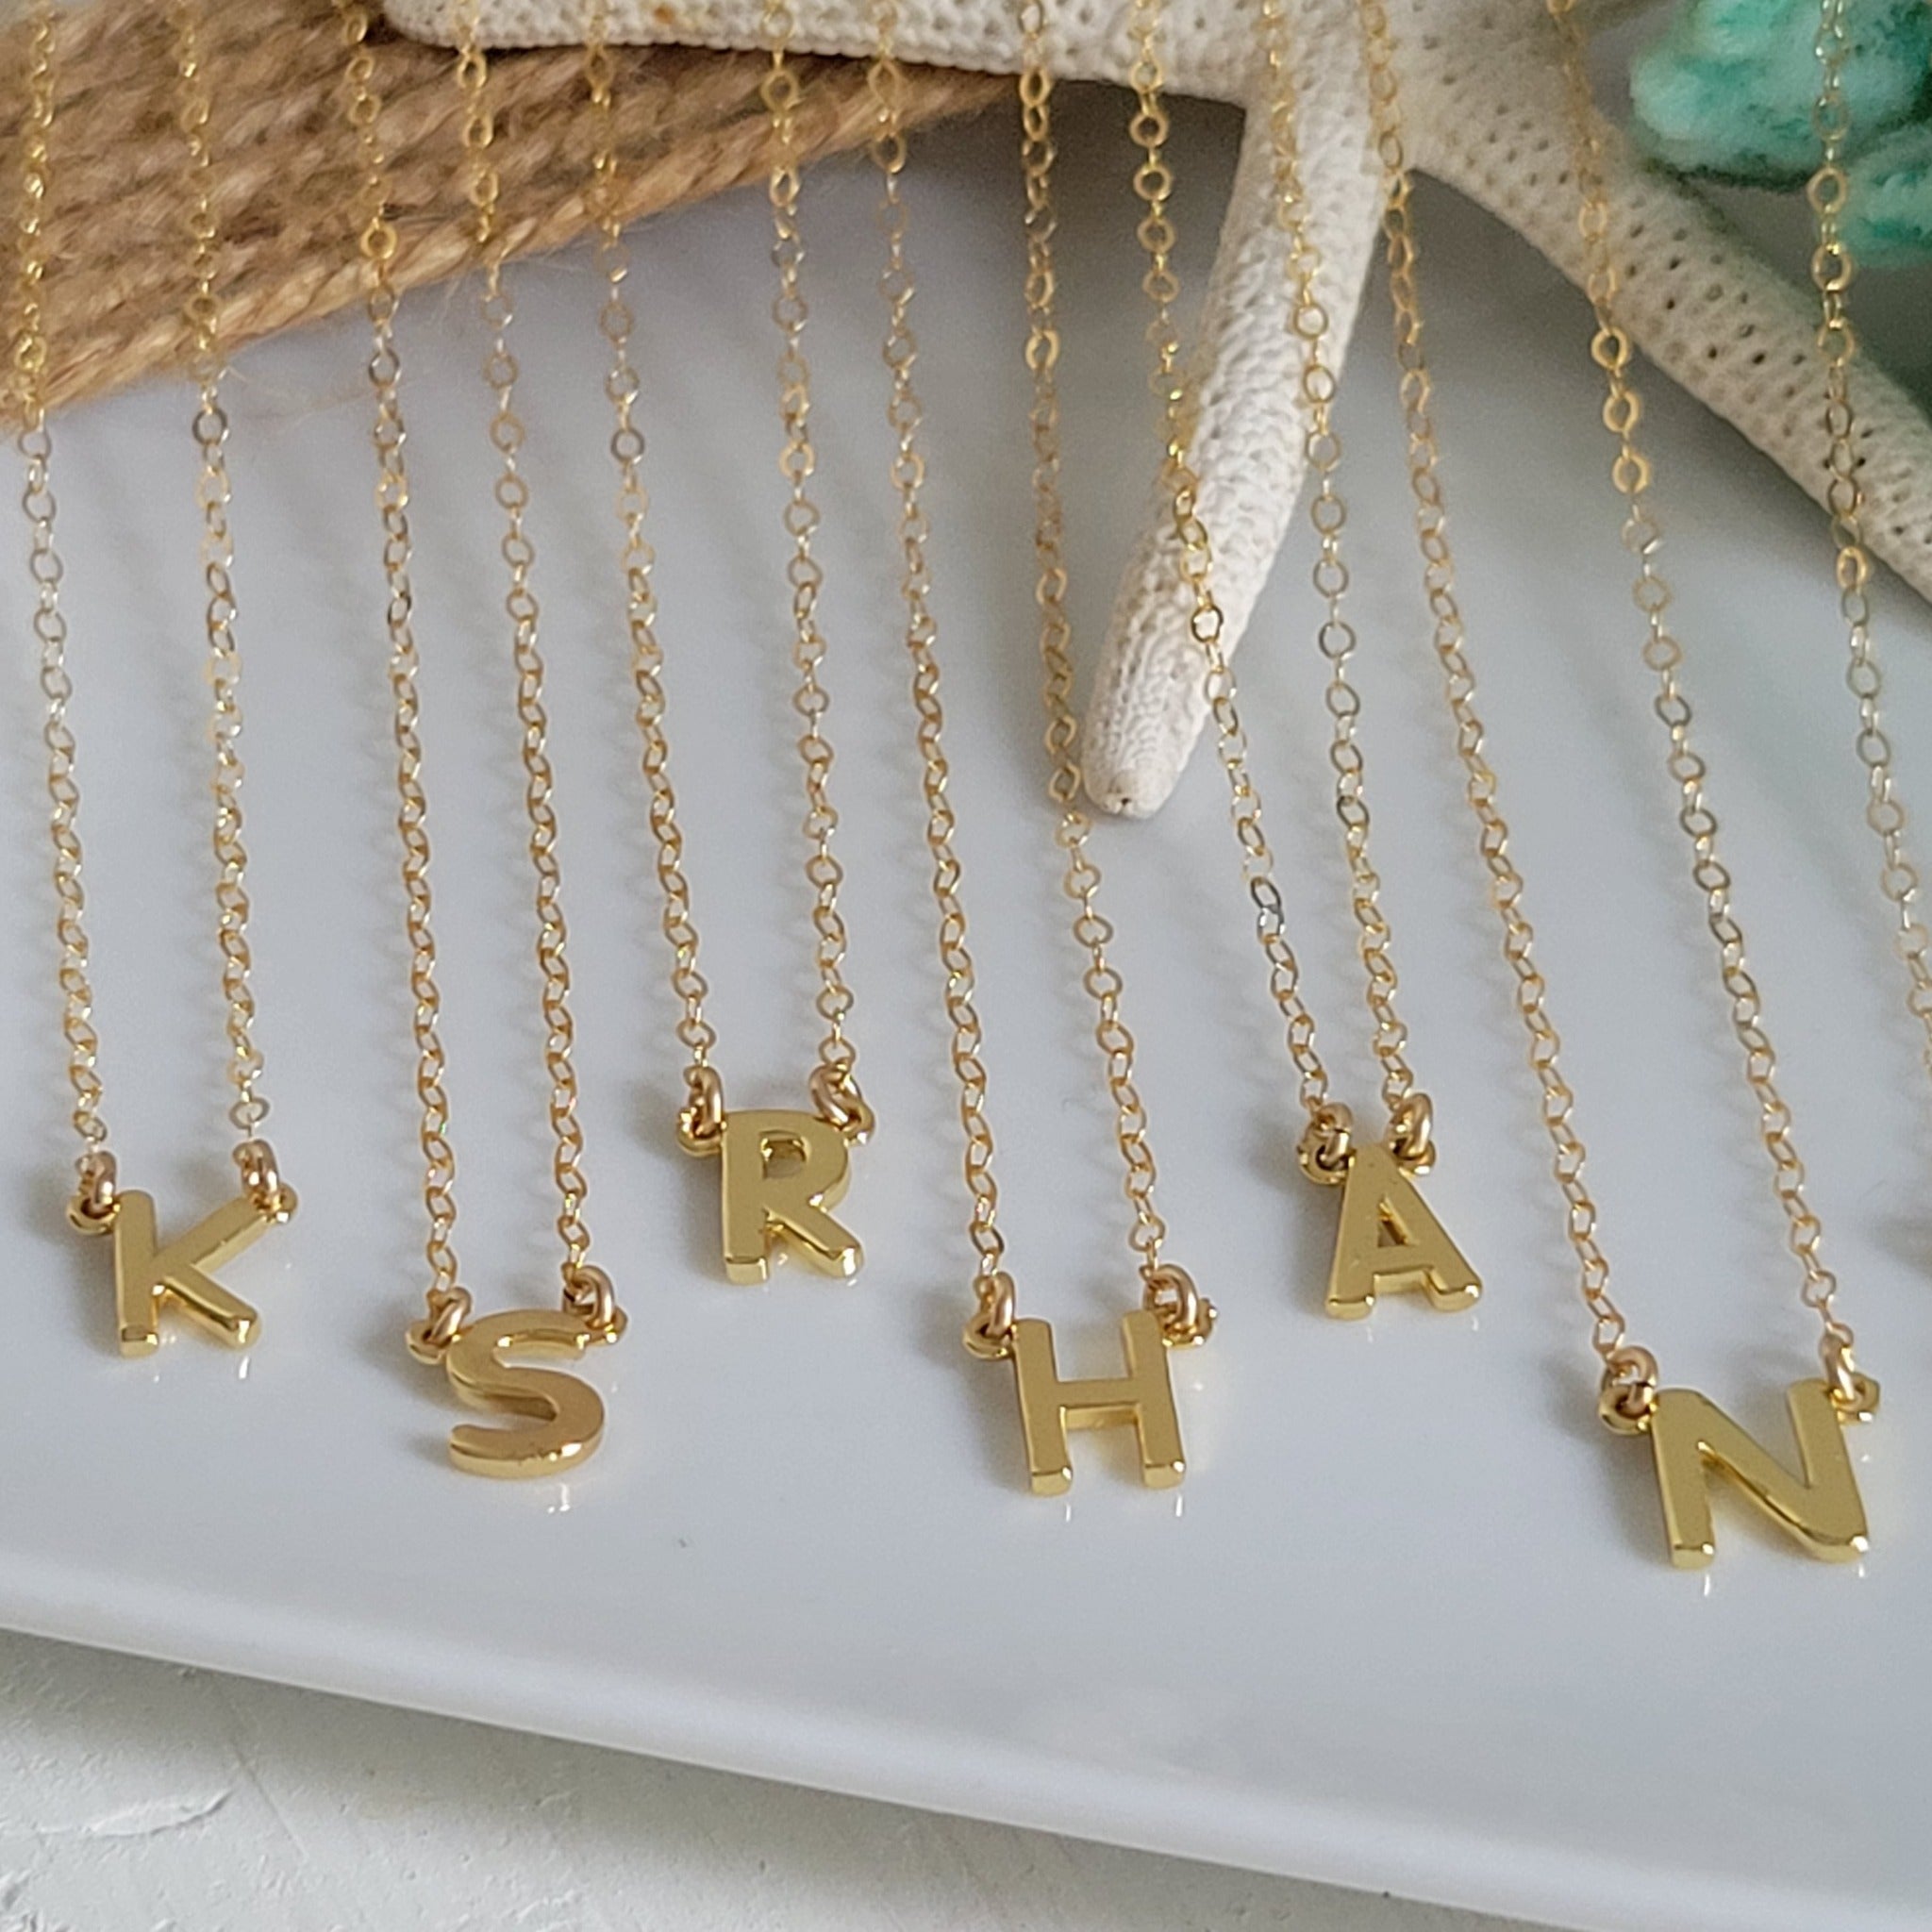 Tiny Gold Initial Necklace - 14kt Gold Filled - Any Initial